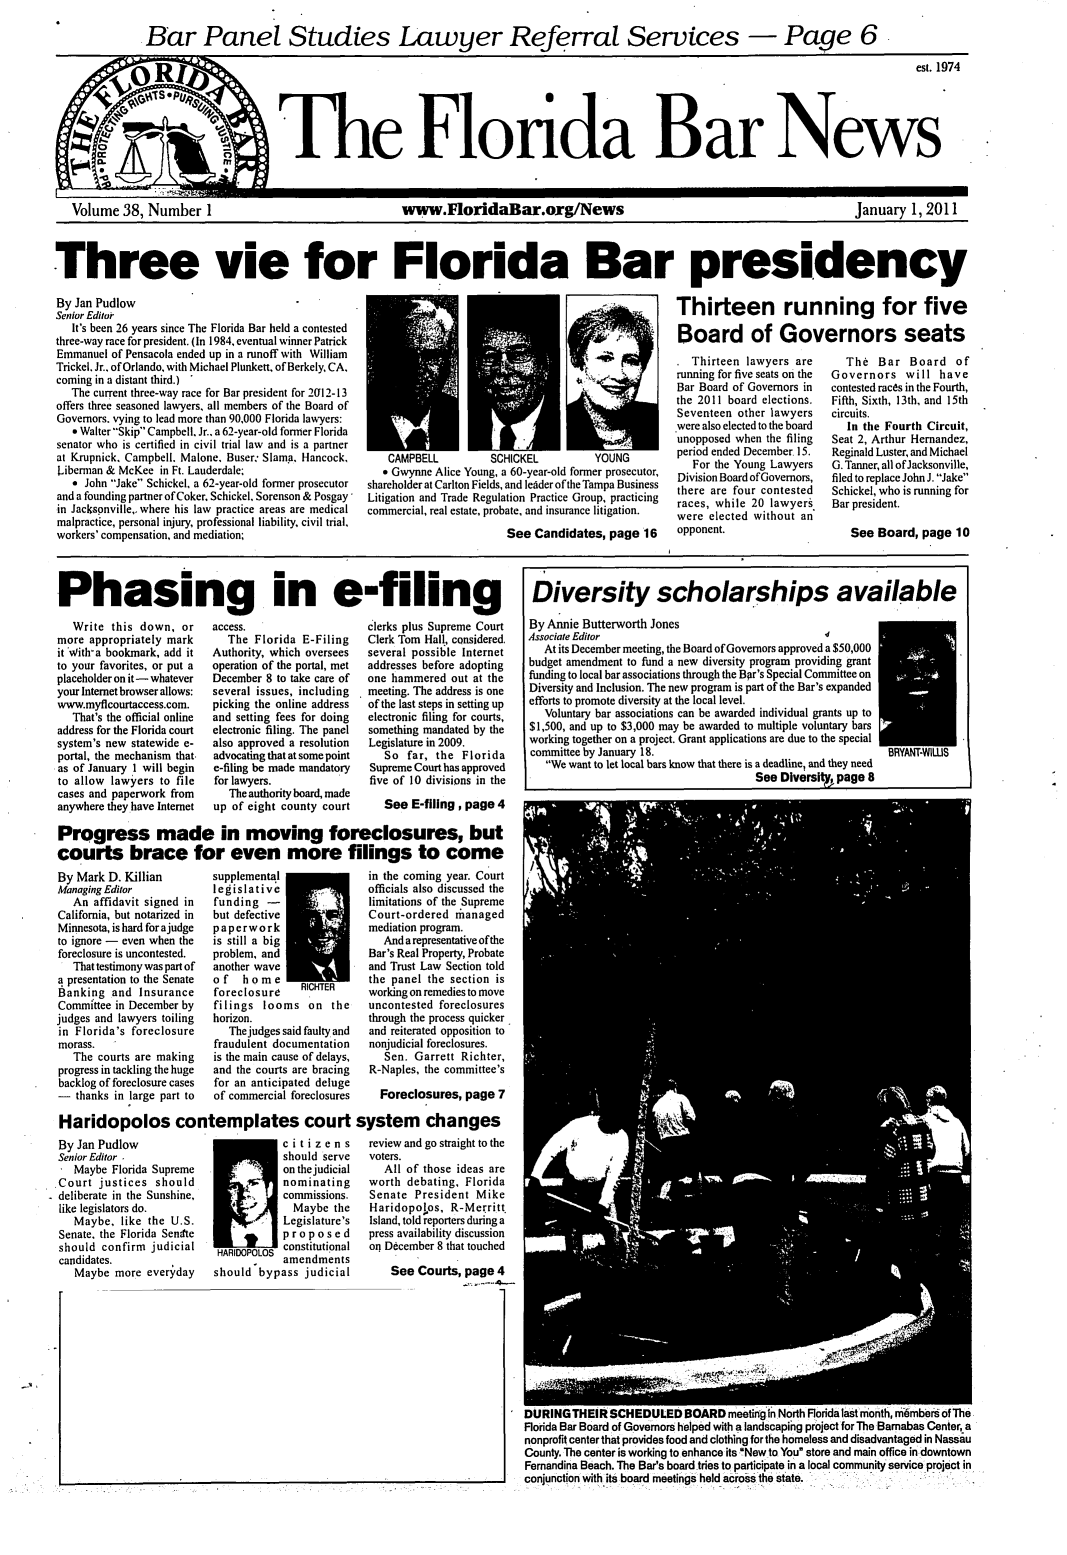 handle is hein.barjournals/flabn0038 and id is 1 raw text is: 

Panel Studies


   Volume 38, Number 1                                      www.FloridaBar.org/News                                                        January 1, 2011



Three vie for Florida Bar presidency


By Jan Pudlow
Senior Editor
   It's been 26 years since The Florida Bar held a contested
three-way race for president. (In 1984, eventual winner Patrick
Emmanuel of Pensacola ended up in a runoff with William
Trickel. Jr., of Orlando, with Michael Plunkett, of Berkely, CA,
coming in a distant third.) 
   The current three-way race for Bar president for 2012-13
offers three seasoned lawyers, all members of the Board of
Governors. vying to lead more than 90,000 Florida lawyers:
   9 Walter Skip Campbell. Jr.. a 62-year-old former Florida
senator who is certified in civil trial law and is a partner
at Krupnick. Campbell. Malone, Buser. Slama. Hancock,
Liberman & McKee in Ft. Lauderdale;
   e John Jake Schickel, a 62-year-old former prosecutor
and a founding partner of Coker. Schickel, Sorenson & Posgay
in Jacksgnville,,where his law practice areas are medical
malpractice, personal injury, professional liability, civil trial,
workers' compensation, and mediation;


Thirteen running for five

Board of Governors seats


    CAMPBELL         SCHICKEL           YOUNG
    e Gwynne Alice Young, a 60-year-old former prosecutor,
shareholder at Carlton Fields, and lelder of the Tampa Business
Litigation and Trade Regulation Practice Group, practicing
commercial, real estate, probate, and insurance litigation.
                        See Candidates, page 16


. Thirteen lawyers are
running for five seats on the
Bar Board of Governors in
the 2011 board elections.
Seventeen other lawyers
were also elected to the board
unopposed when the filing
period ended December. 15.
   For the Young Lawyers
Division Board of Governors,
there are four contested
races, while 20 lawyers
were elected without an
opponent.


   The Bar Board of
Governors will have
contested races in the Fourth,
Fifth, Sixth, 13th, and 15th
circuits.
   In the Fourth Circuit,
Seat 2, Arthur Hernandez,
Reginald Luster, and Michael
G. Tanner, all ofJacksonville,
filed to replace John J. Jake
Schickel, who is running for
Bar president.

   See Board, page 10


Phasing in e-filing


   Write this down, or
more appropriately mark
it 'With'a bookmark, add it
to your favorites, or put a
placeholder on it- whatever
your Internet browser allows:
www.myflcourtaccess.com.
   That's the official online
address for the Florida court
system's new statewide e-
portal, the mechanism that.
as of January 1 will begin
to allow lawyers to file
cases and paperwork from
anywhere they have Internet


access.
   The Florida E-Filing
Authority, which oversees
operation of the portal, met
December 8 to take care of
several issues, including
picking the online address
and setting fees for doing
electronic filing. The panel
also approved a resolution
advocating that at some point
e-filing be made mandatory
for lawyers.
   The authority board, made
up of eight county court


clerks plus Supreme Court
Clerk Tom Hall, considered.
several possible Internet
addresses before adopting
one hammered out at the
meeting. The address is one
of the last steps in setting up
electronic filing for courts,
something mandated by the
Legislature in 2009.
   So far, the Florida
Supreme Court has approved
five of 10 divisions in the

   See E-fillng, page 4


Progress made in moving foreclosures, but -
courts brace for even more filings to come
By Mark D. Killian  supplemental      in the coming year. Court
Managing Editor    legislative        officials also discussed the


   An affidavit signed in
California, but notarized in
Minnesota, is hard for ajudge
to ignore - even when the
foreclosure is uncontested.
   That testimony was part of
a presentation to the Senate
Banking and Insurance
Committee in December by
judges and lawyers toiling
in Florida's foreclosure
morass.
   The courts are making
progress in tackling the huge
backlog of foreclosure cases
- thanks in large part to


funding -I
but defective
paperwork
is still a big
problem, and
another wave
of   home        C
foreclosure    RICHTER
filings looms on the
horizon.
   The judges said faulty and
fraudulent documentation
is the main cause of delays,
and the courts are bracing
for an anticipated deluge
of commercial foreclosures


limitations of the Supreme
Court-ordered rhanaged
mediation program.
   And a representative of the
Bar's Real Property, Probate
and Trust Law Section told
the panel the section is
working on remedies to move
uncontested foreclosures
through the process quicker
and reiterated opposition to
nonjudicial foreclosures.
   Sen. Garrett Richter,
R-Naples, the committee's

  Foreclosures, page 7


Haridopolos contemplates court system changes


By Jan Pudlow
Senior Editor .
   Maybe Florida Supreme
.Court justices should
deliberate in the Sunshine,
like legislators do.
   Maybe, like the U.S.
 Senate. the Florida Sentte
 should confirm judicial
 candidates.
   Maybe more everyday


-           citizens
            should serve
            on the judicial
            nominating
            commissions.
              Maybe the
            Legislature's
            proposed
            constitutional
            amendments
should bypass judicial


review and go straight to the
voters.
   All of those ideas are
worth debating, Florida
Senate President Mike
Haridopolos, R-Merritt.
Island, told reporters during a
press availability discussion
on December 8 that touched

    See Courts, page 4


DURINGTHEIR SCHEDULED BOARD meeting In North Florida last month, m-6mbebr of The
Florida Bar Board of Governors helped with a landscaping project for The Barnabas Center, a
nonprofit center that provides food and clothing for the homeless and disadvantaged in Nassau
County. The center is working to enhanceits New to You store and main office in downtown
Fernandina Beach. The Bar's board tries to participate in a local community service project in
conjunction with its board meetings held across the state.


Diversity scholarships available

By Annie Butterworth Jones
Associate Editor
   At its December meeting, the Board of Governors approved a $50,000
budget amendment to fund a new diversity program providing grant
funding to local bar associations through the Bpr's Special Committee on
Diversity and Inclusion. The new program is part of the Bar's expanded
efforts to promote diversity at the local level.
   Voluntary bar associations can be awarded individual grants up to
$1,500, and up to $3,000 may be awarded to multiple voluntary bars
working together on a project. Grant applications are due to the special
committee by January 18.                                       BRYANT-WIWS
   We want to let local bars know that there is a deadline, and they need
                                       See Diversitt, page 8


